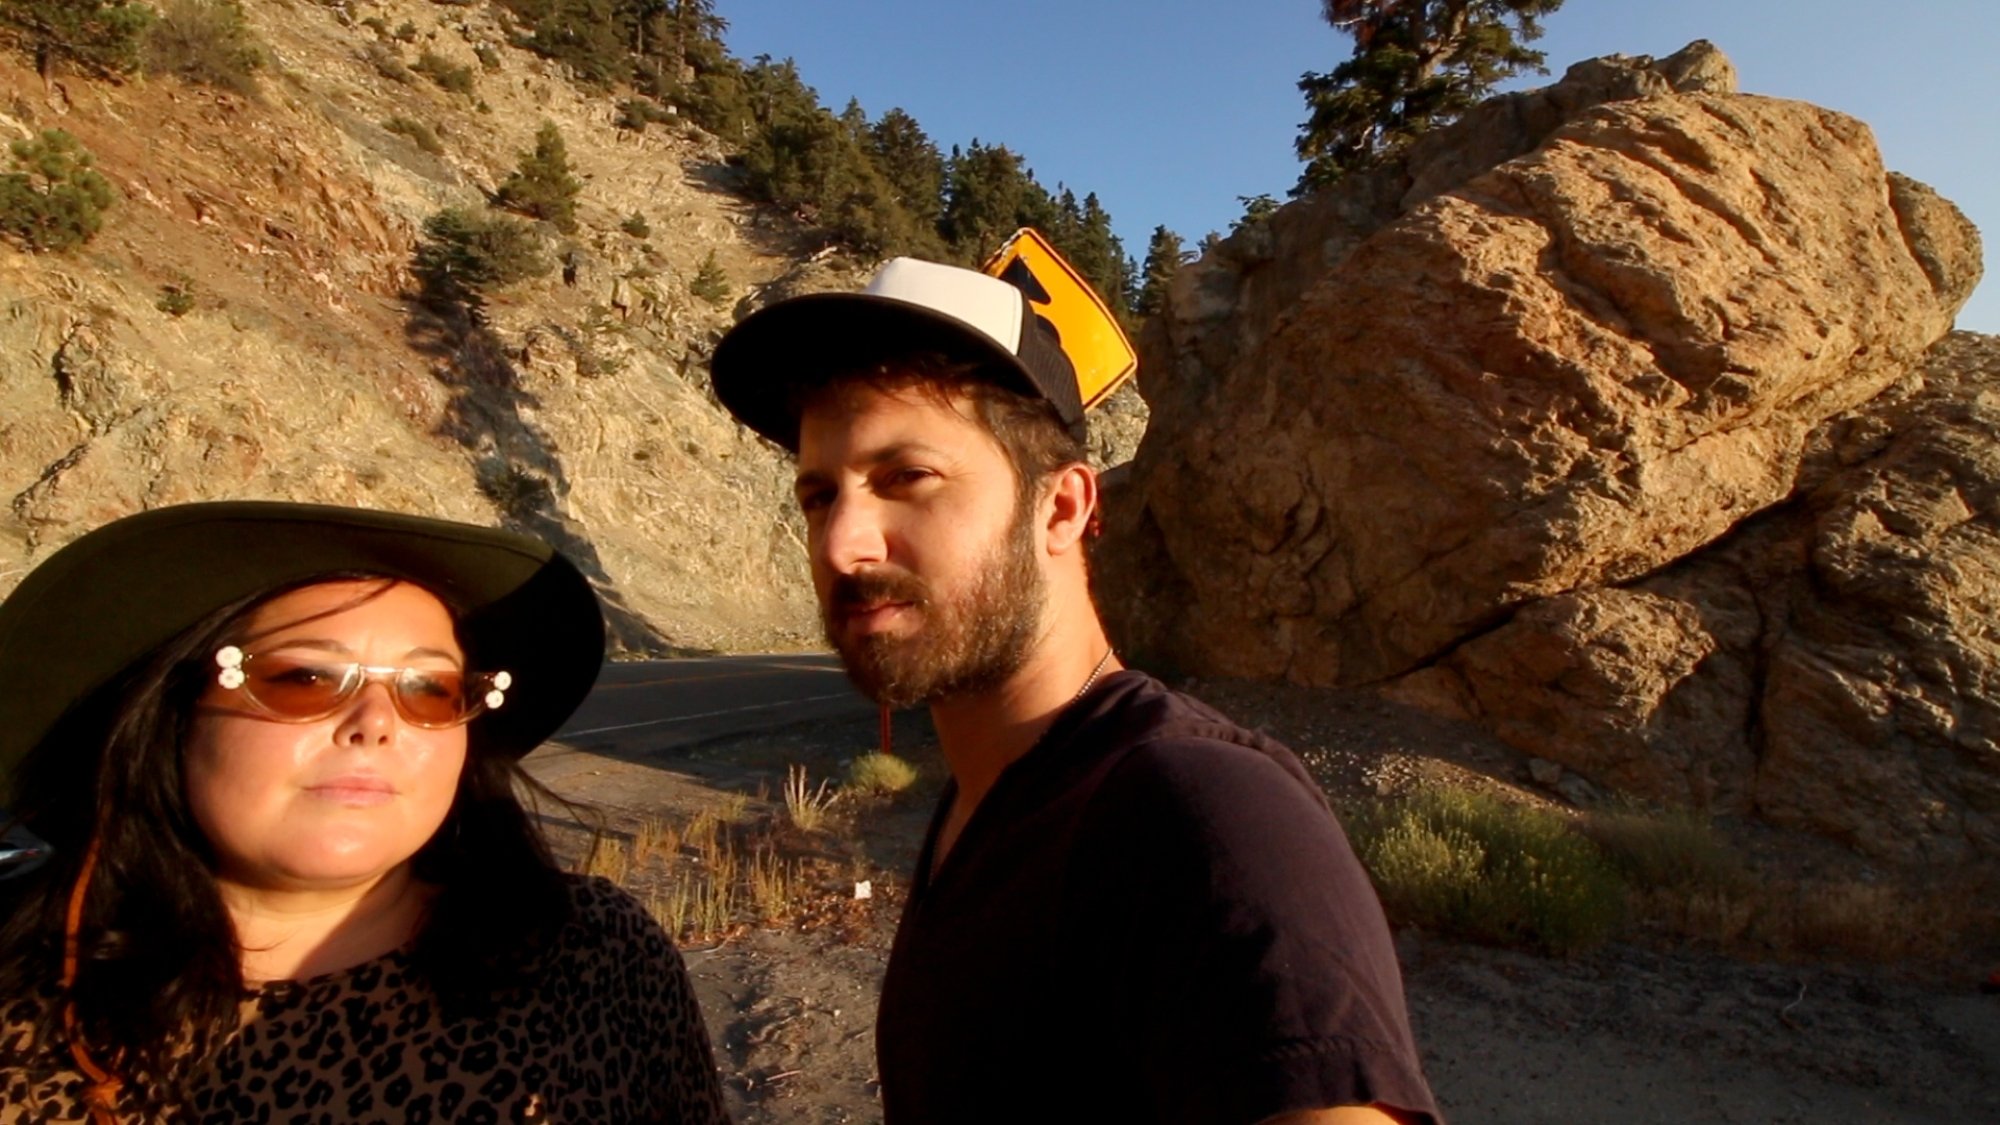 'The Outwaters' Angela Basolis as Ange Bocuzzi and Robbie Banfitch as Robbie Zagorac looking at the camera standing in front of a dirt road and rocky hillside